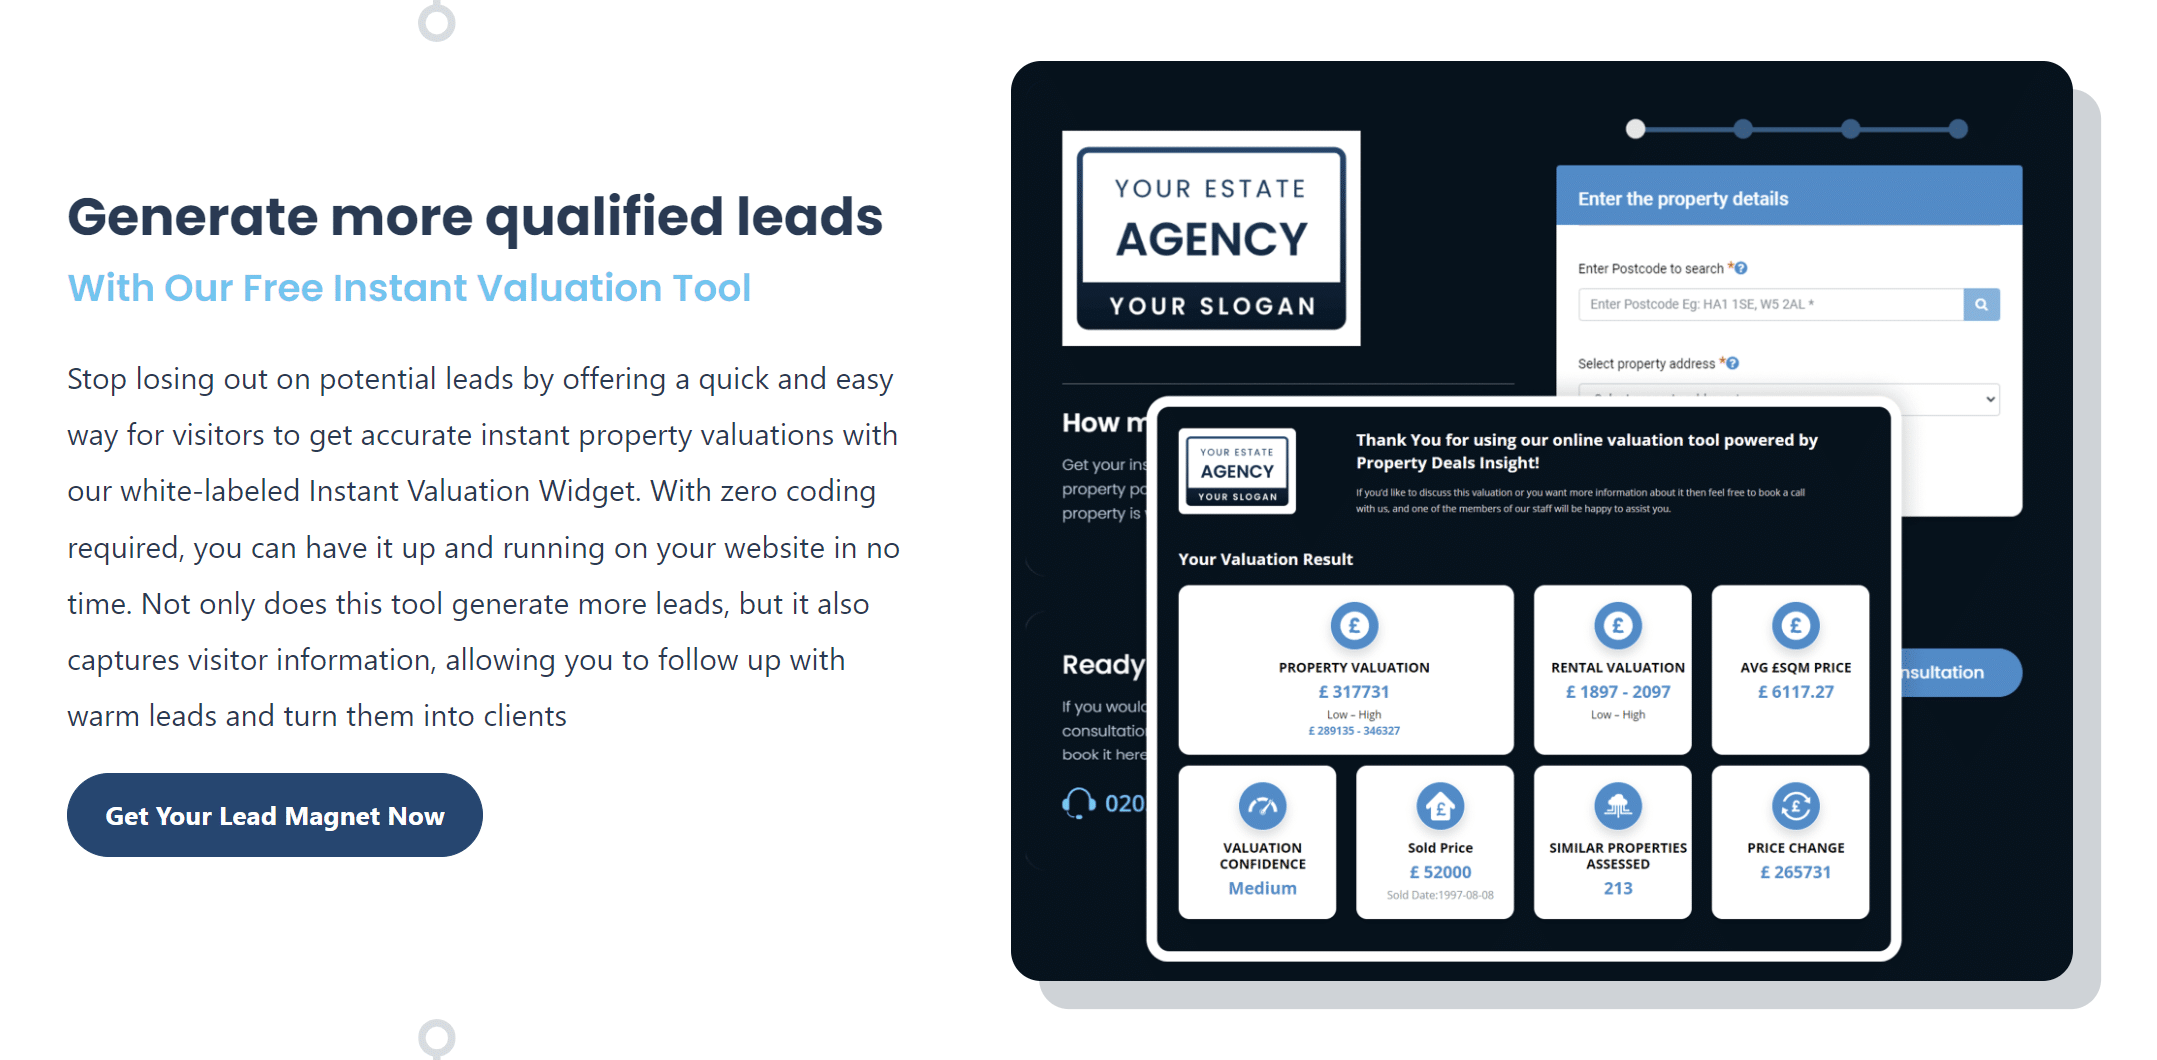 Generate more qualified leads With Our Free Instant Valuation Tool